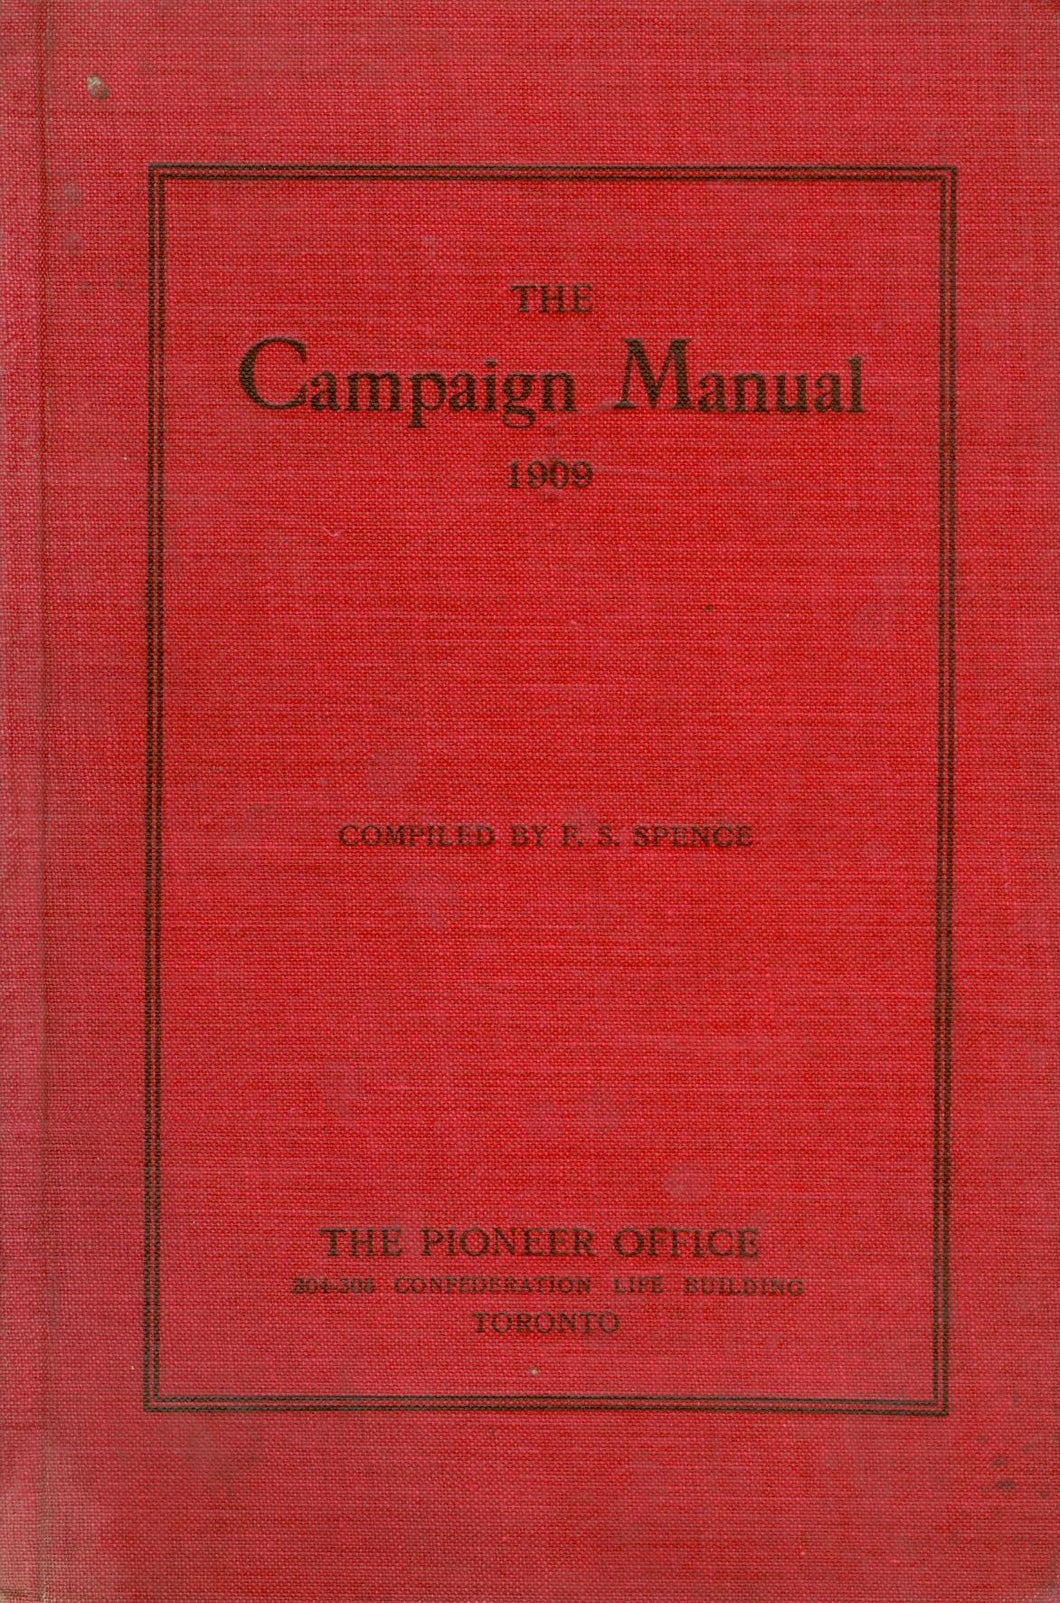 The Campaign Manual 1909